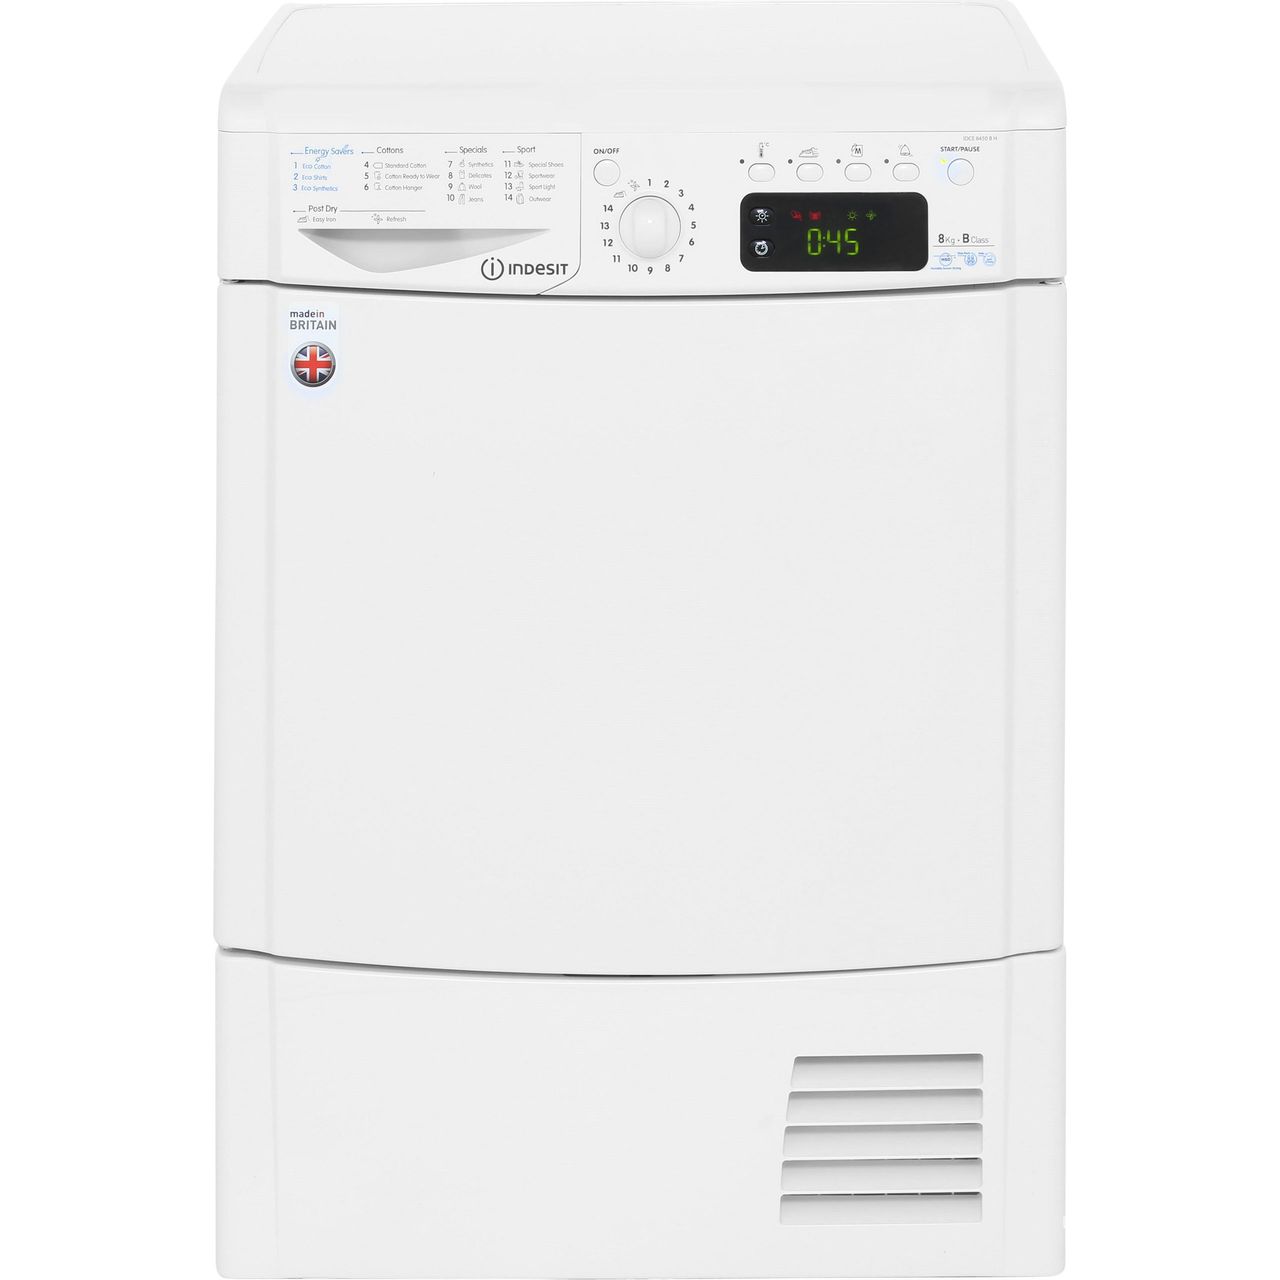 Indesit Eco Time IDCE8450BH 8Kg Condenser Tumble Dryer Review